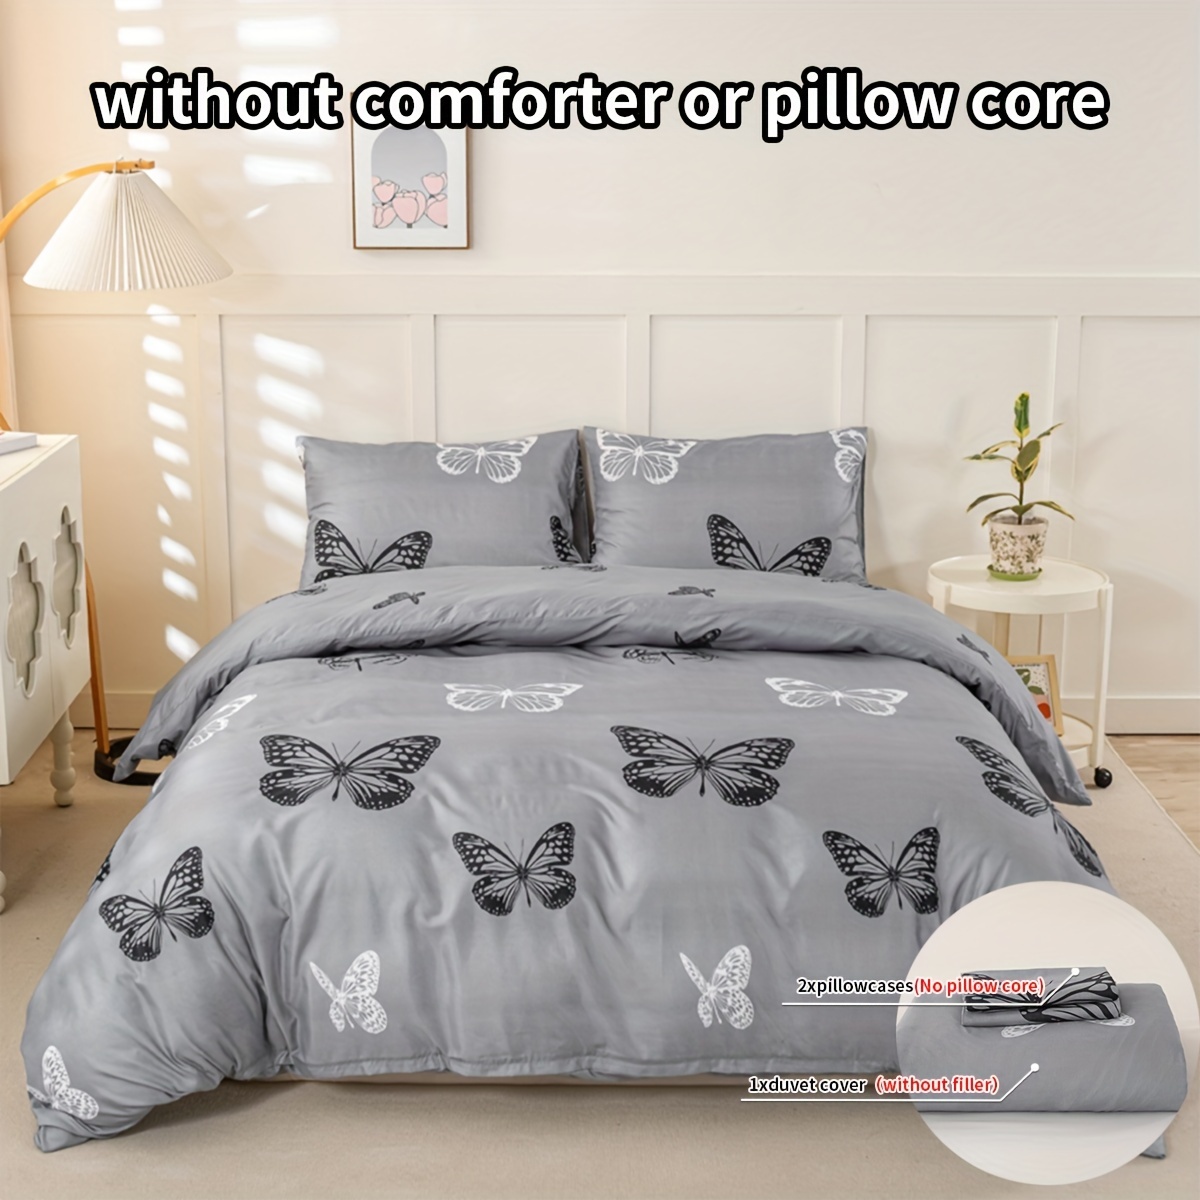 

3-piece Soft & Cozy Duvet Cover Set With Black And White Butterfly Print - Includes 1 Duvet Cover And 2 Pillowcases, Zip Closure, Machine Washable - Perfect For All Seasons